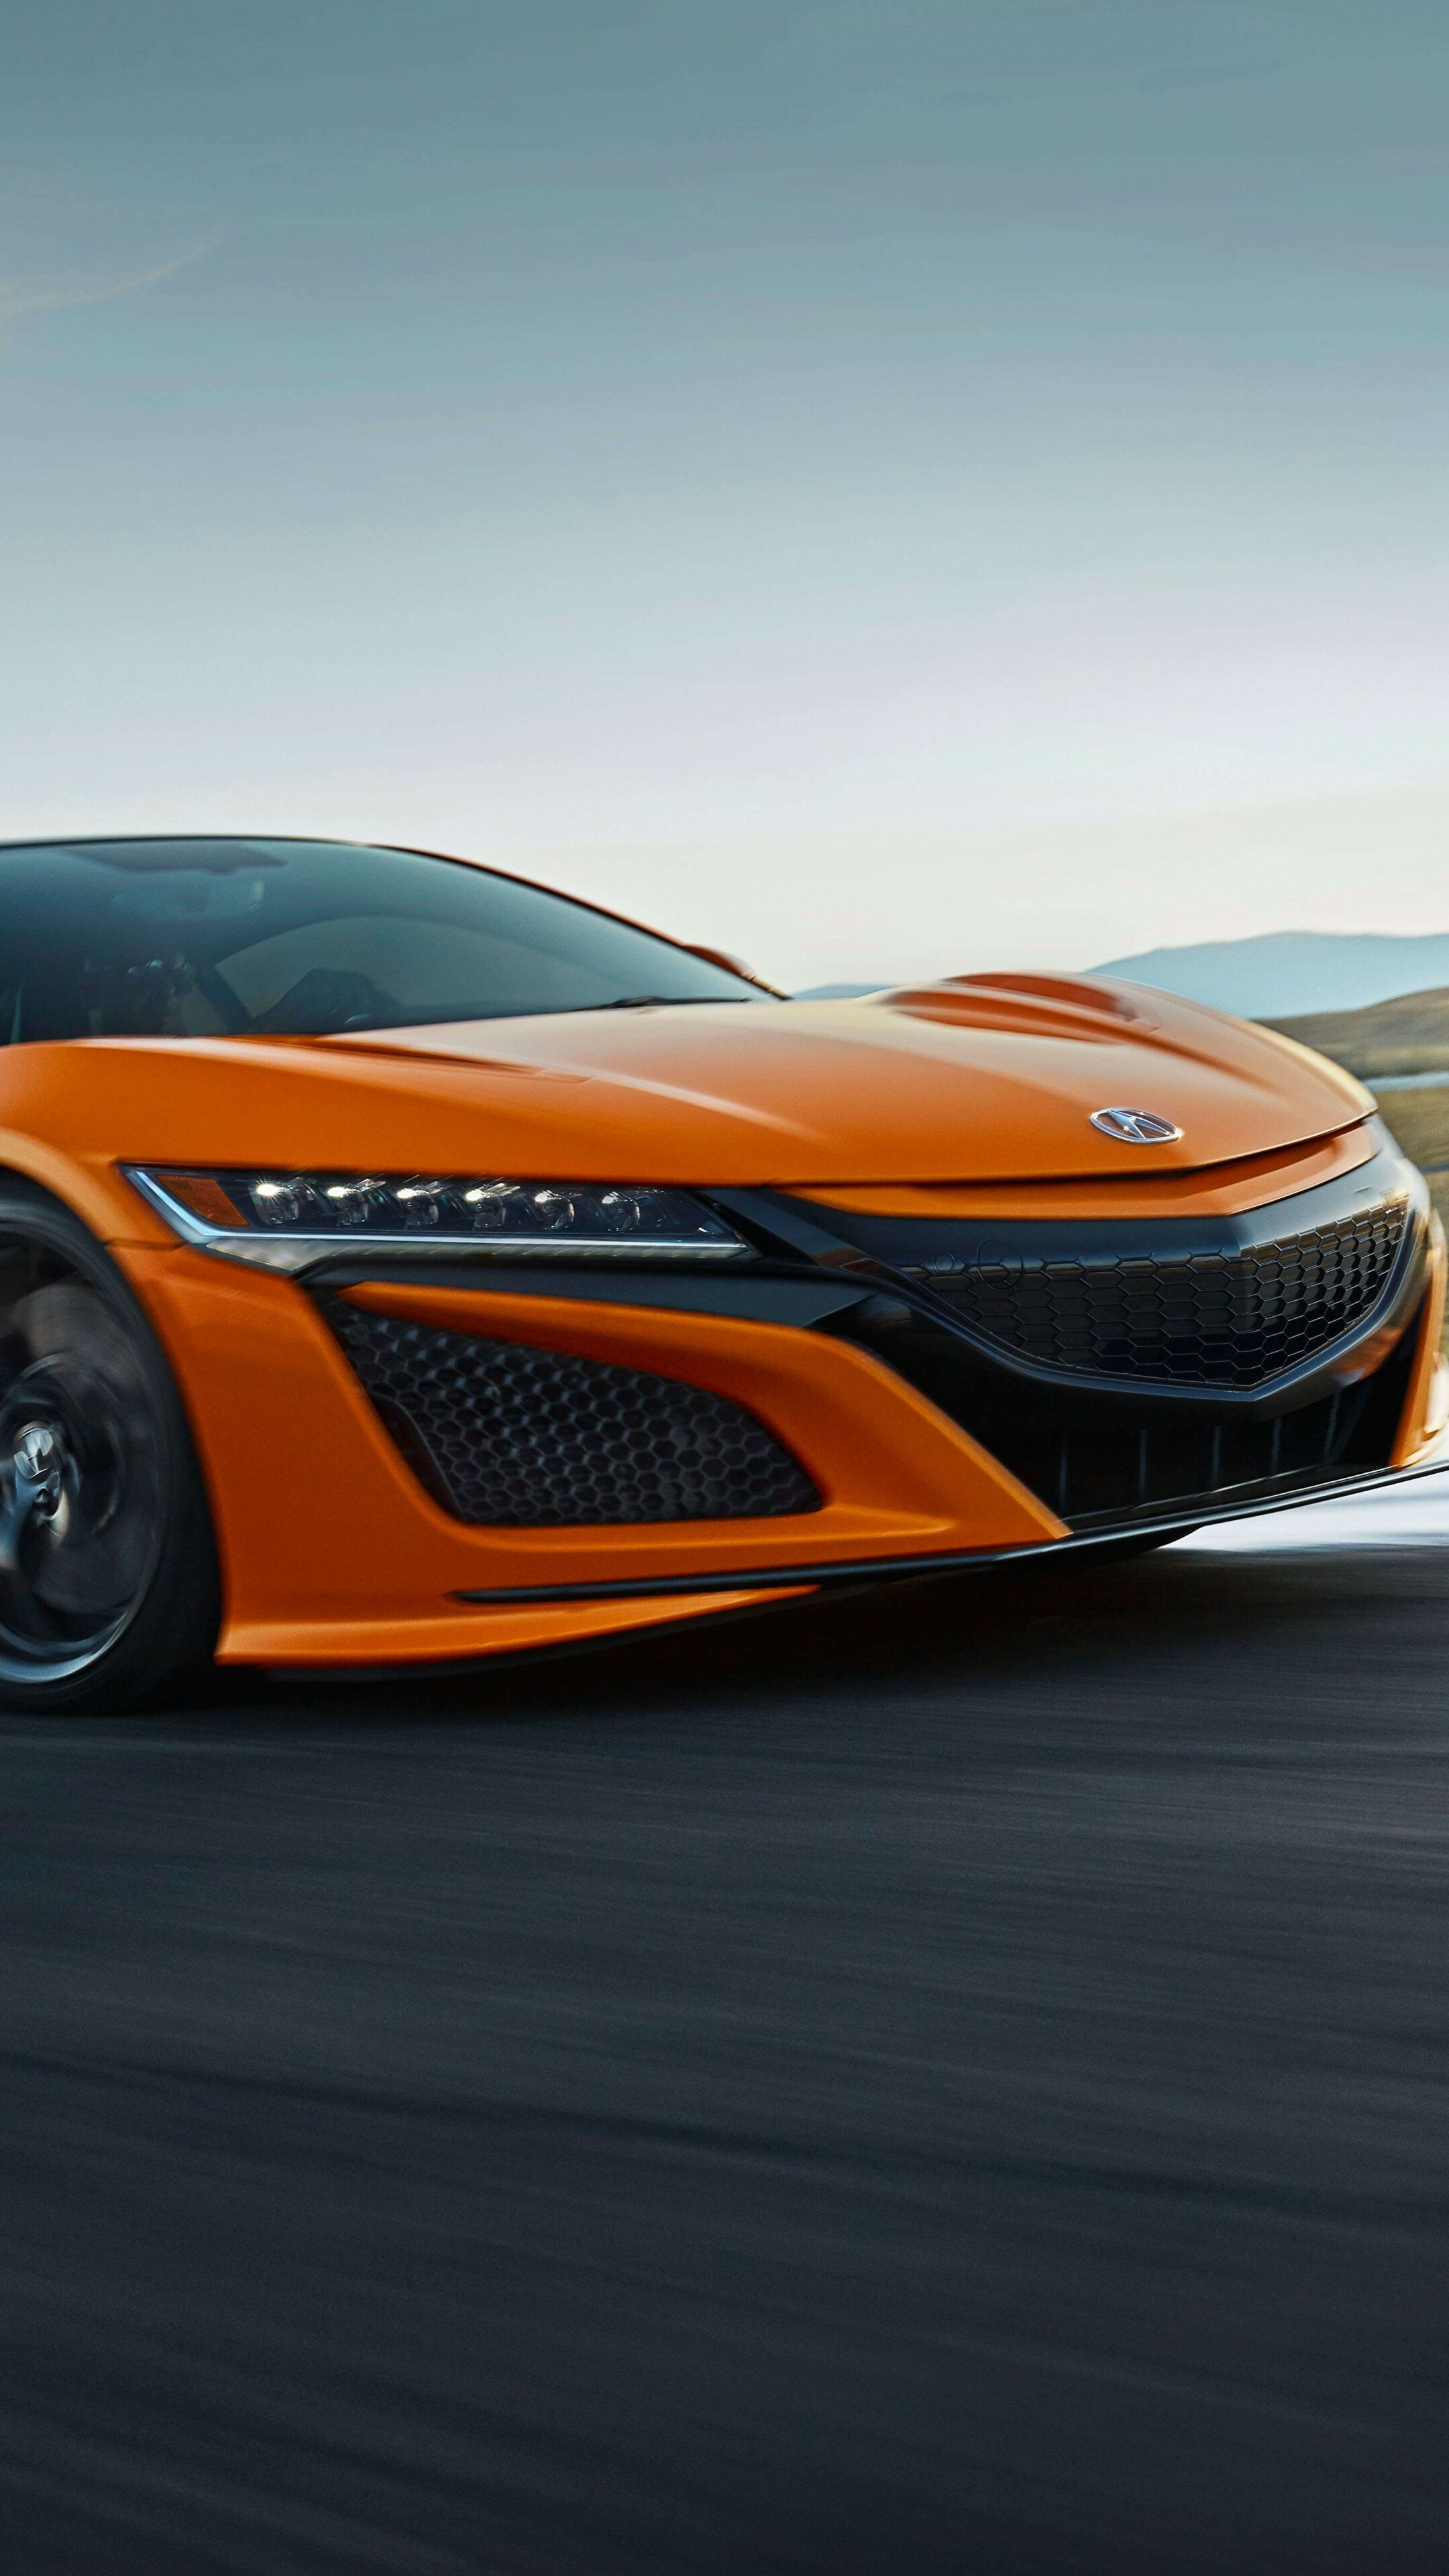 Acura: NSX, A two-seat, mid-engined coupe sports car manufactured by Honda. 2160x3840 4K Background.